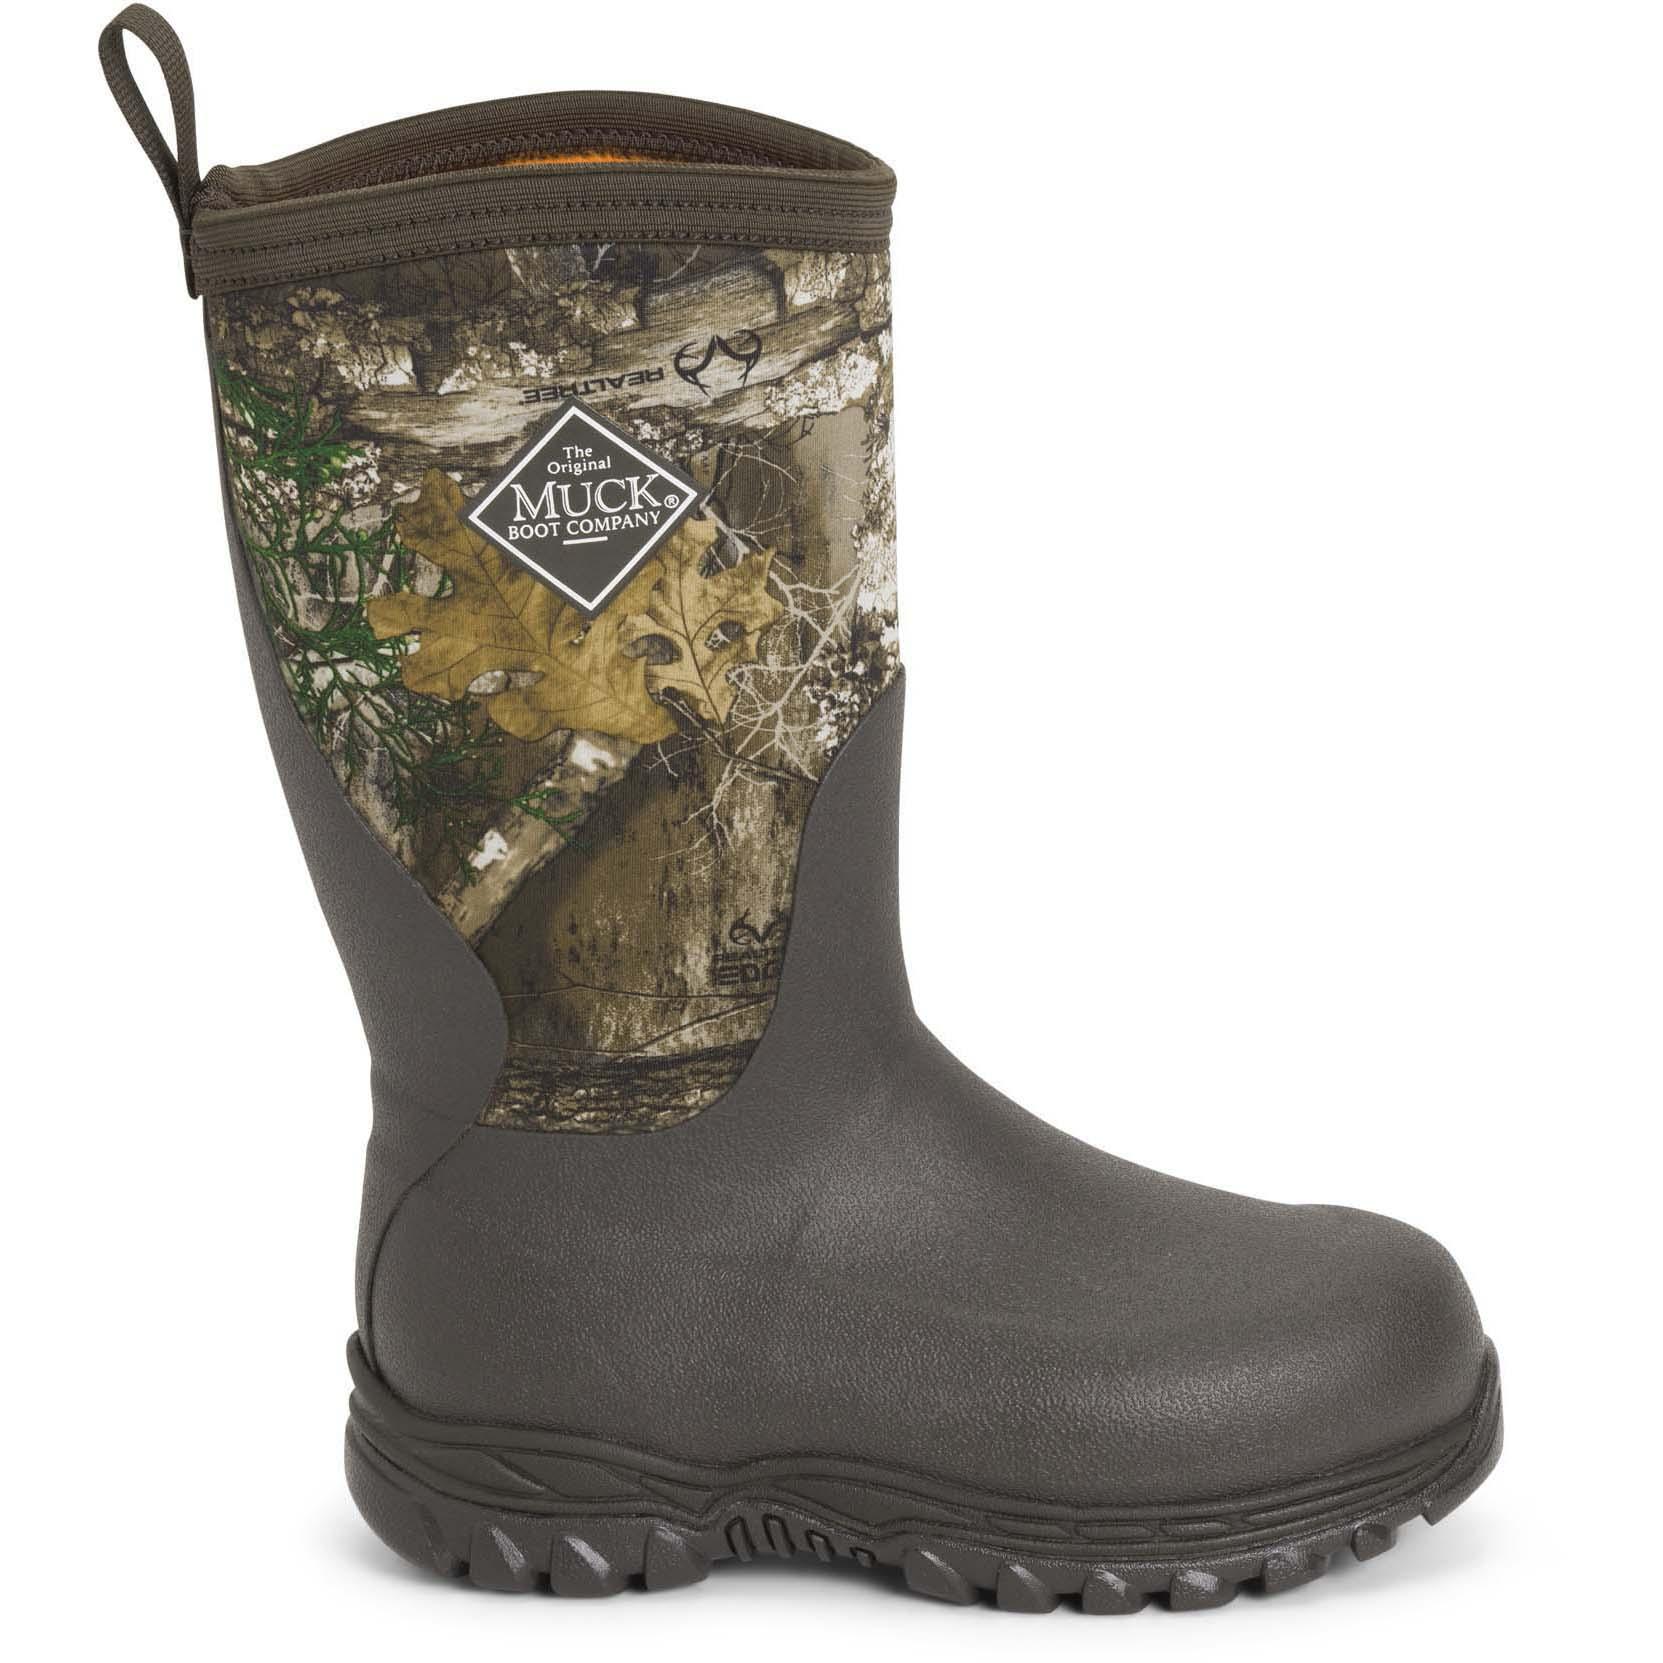 Shop for Muck Rugged II Rain Boot, Child / Youth Brown / Realtree EDGE